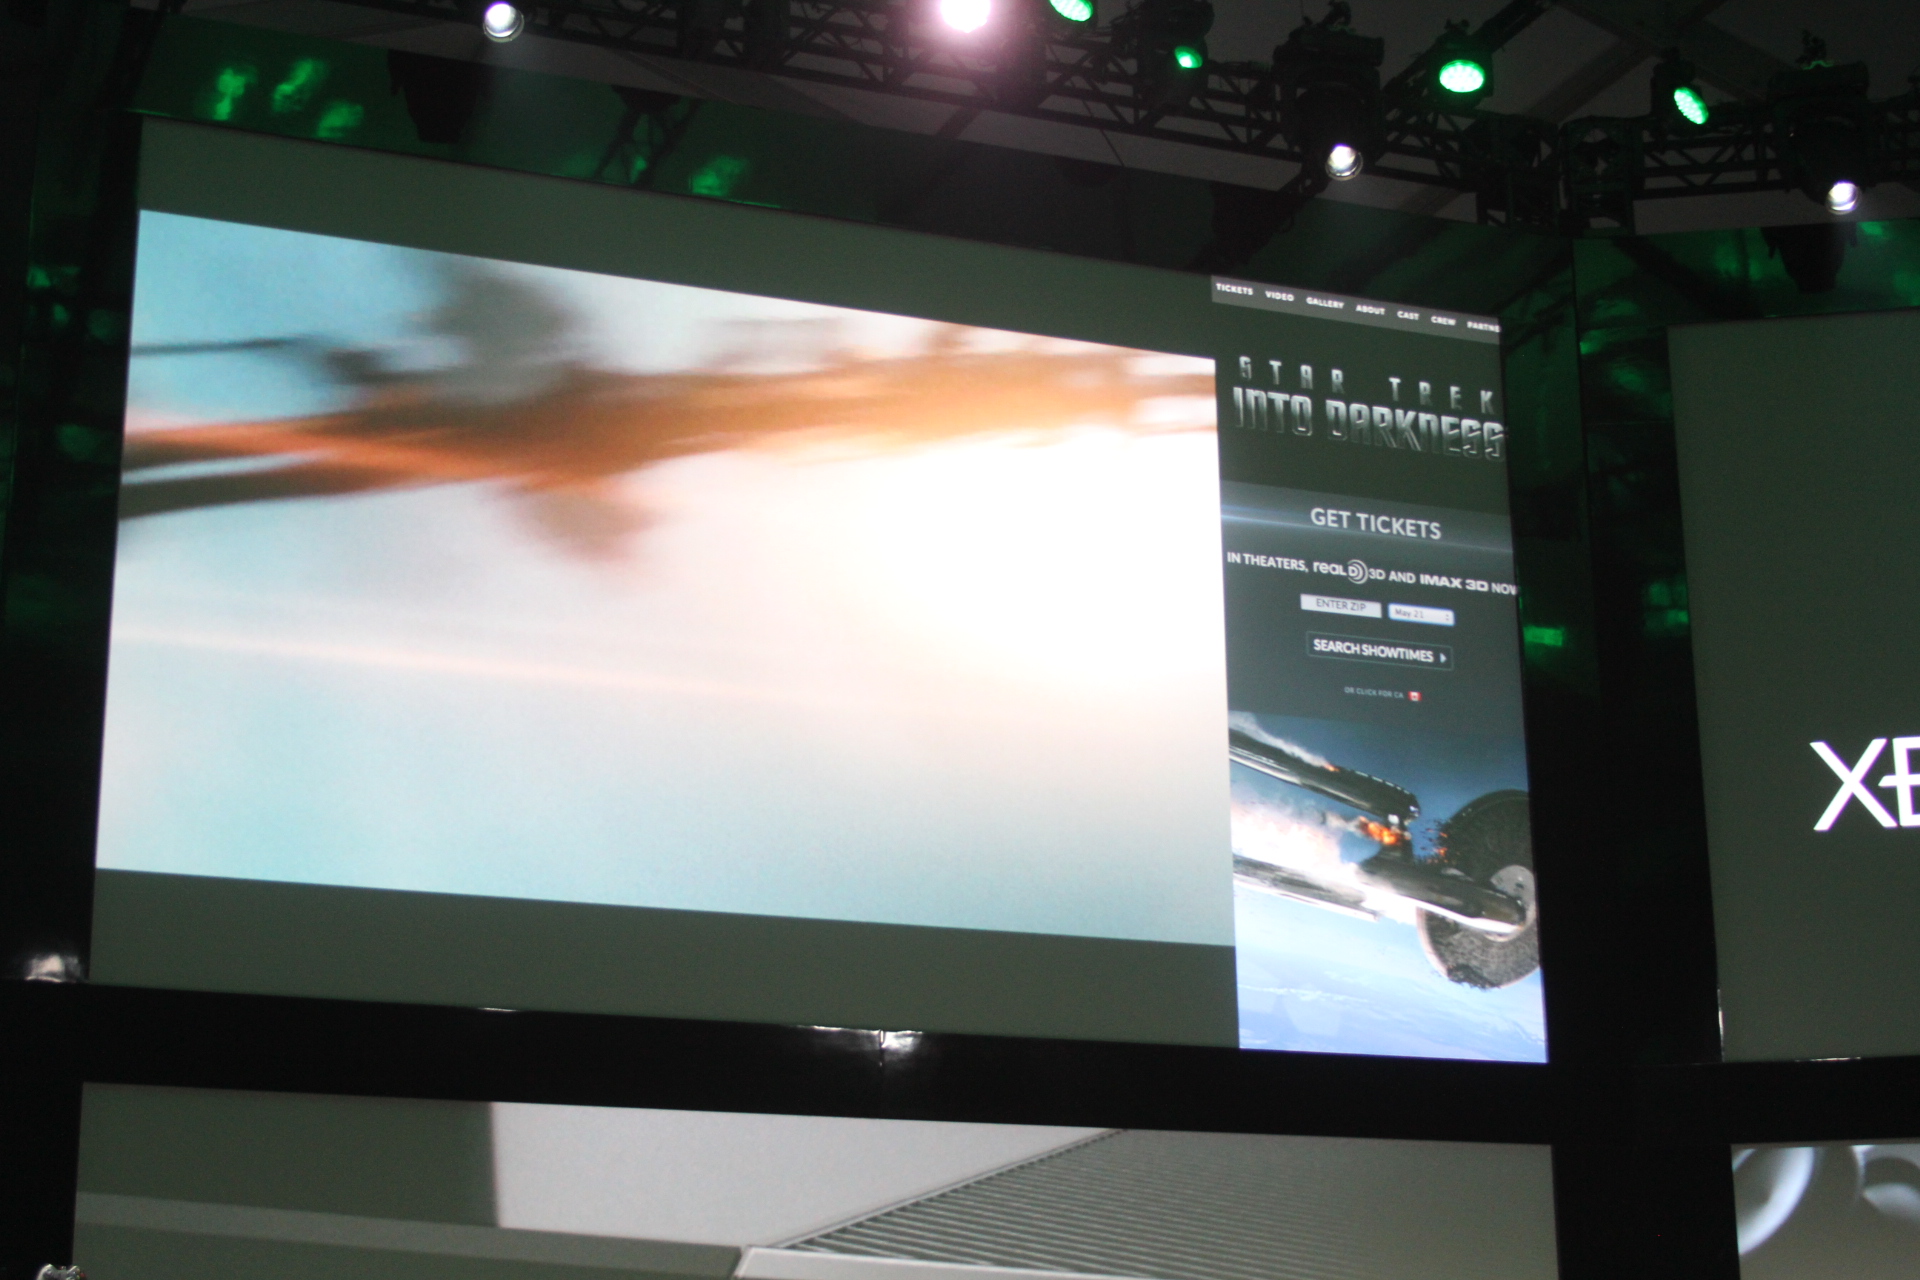 introduces Xbox One with 8GB RAM, USB 3.0, WiFi coming 'later this year'